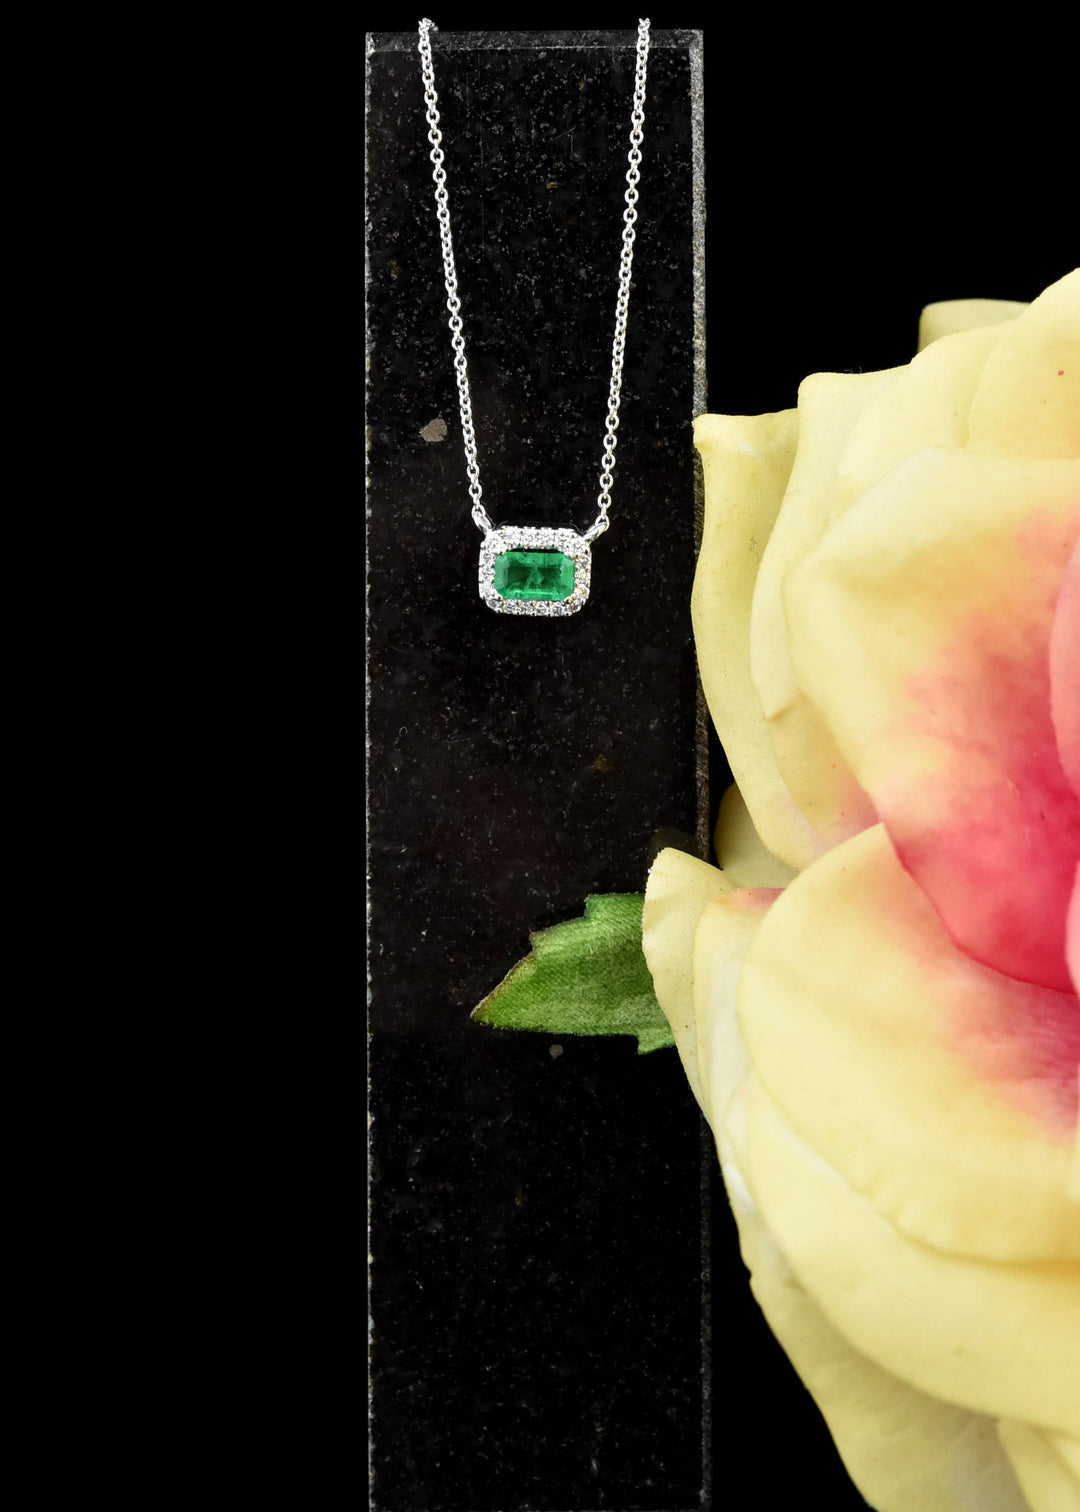 The Daphne: Emerald Halo Necklace in White Gold - Goldmakers Fine Jewelry